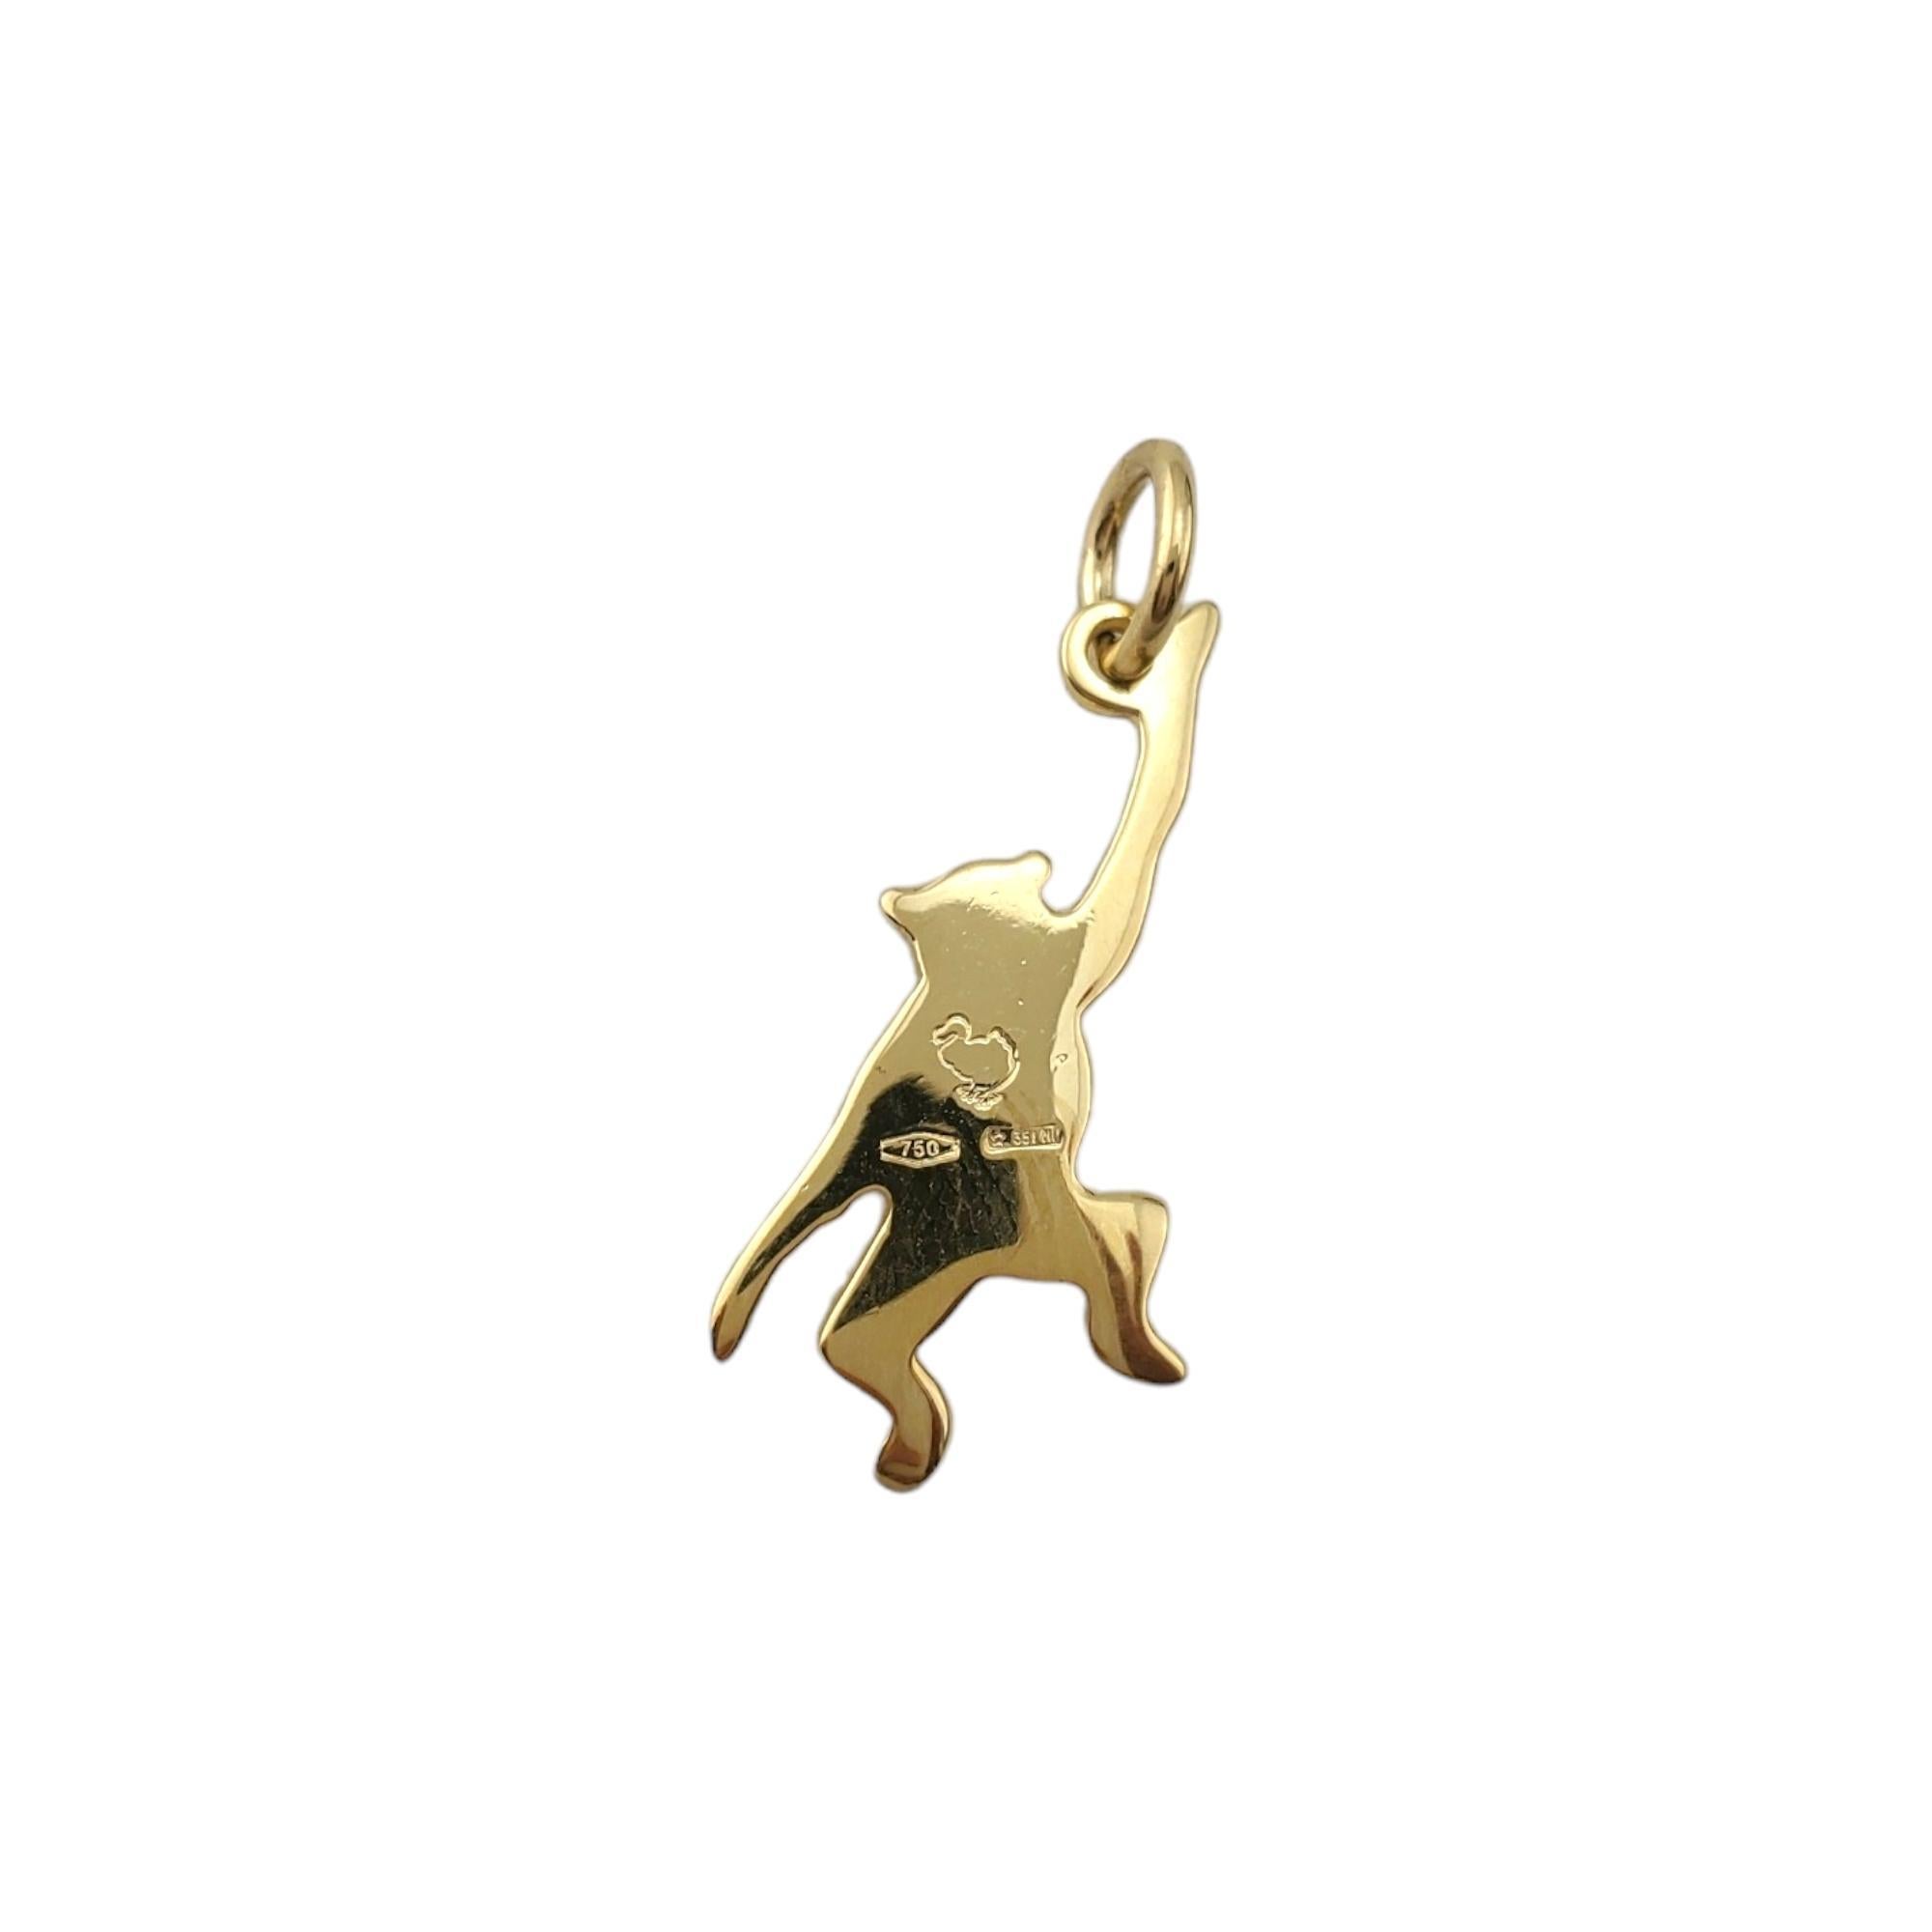 Dodo Pomellato 18K Yellow Gold Monkey Charm

18K yellow gold charm in the shape of a monkey.

This adorable monkey charm swings into your heart!

Hallmark: 750 351 (hallmark for Pomellato)

Weight: 2.0 g/ 1.3 dwt.

Size: 22.4 mm X 10.3 mm X 2.0